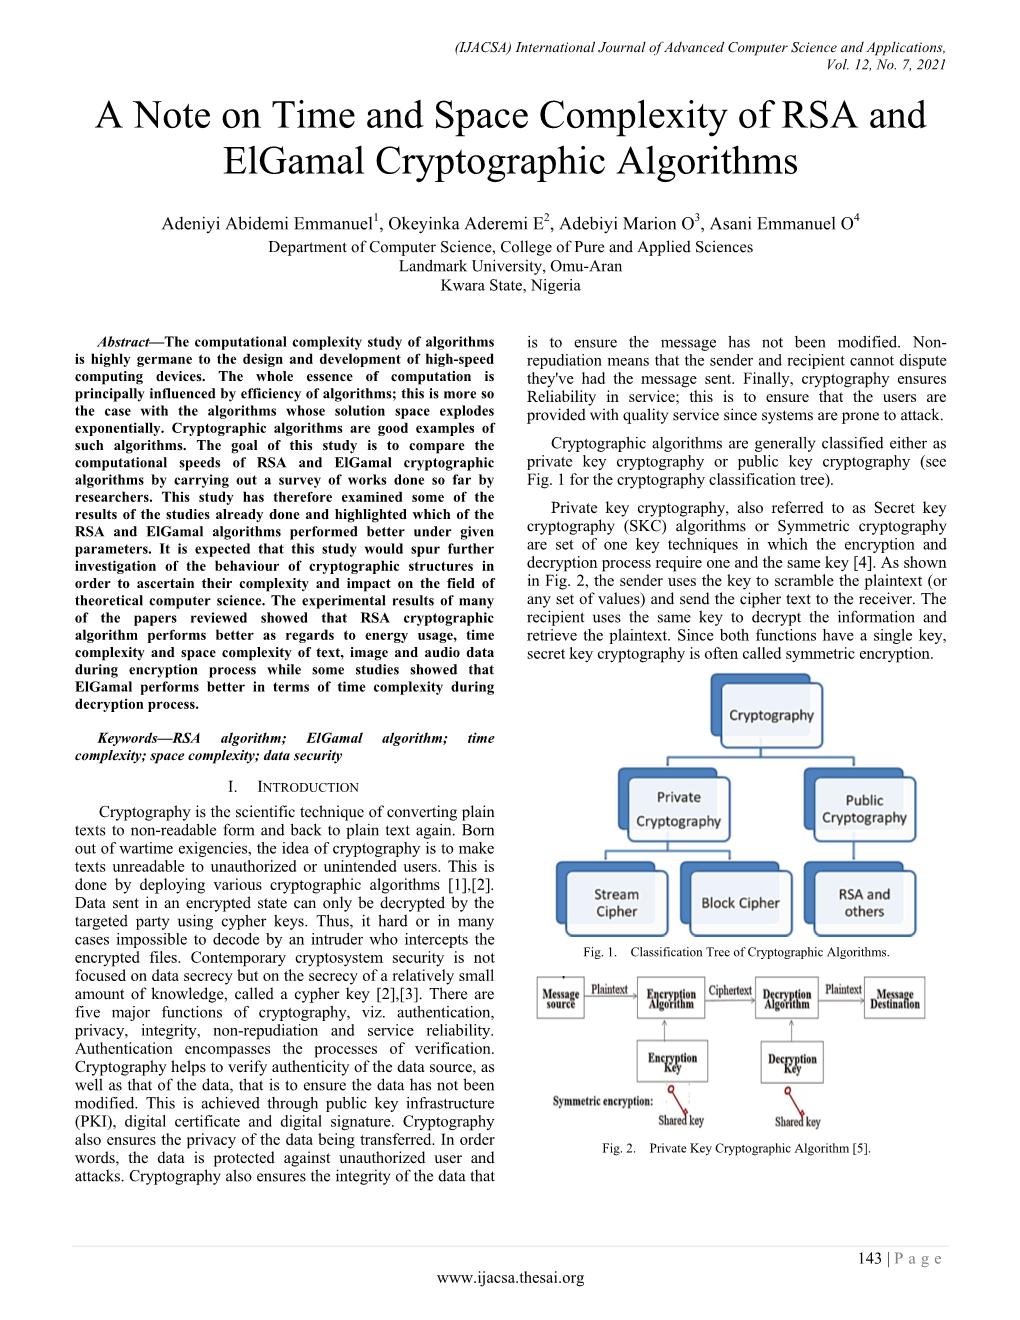 A Note on Time and Space Complexity of RSA and Elgamal Cryptographic Algorithms